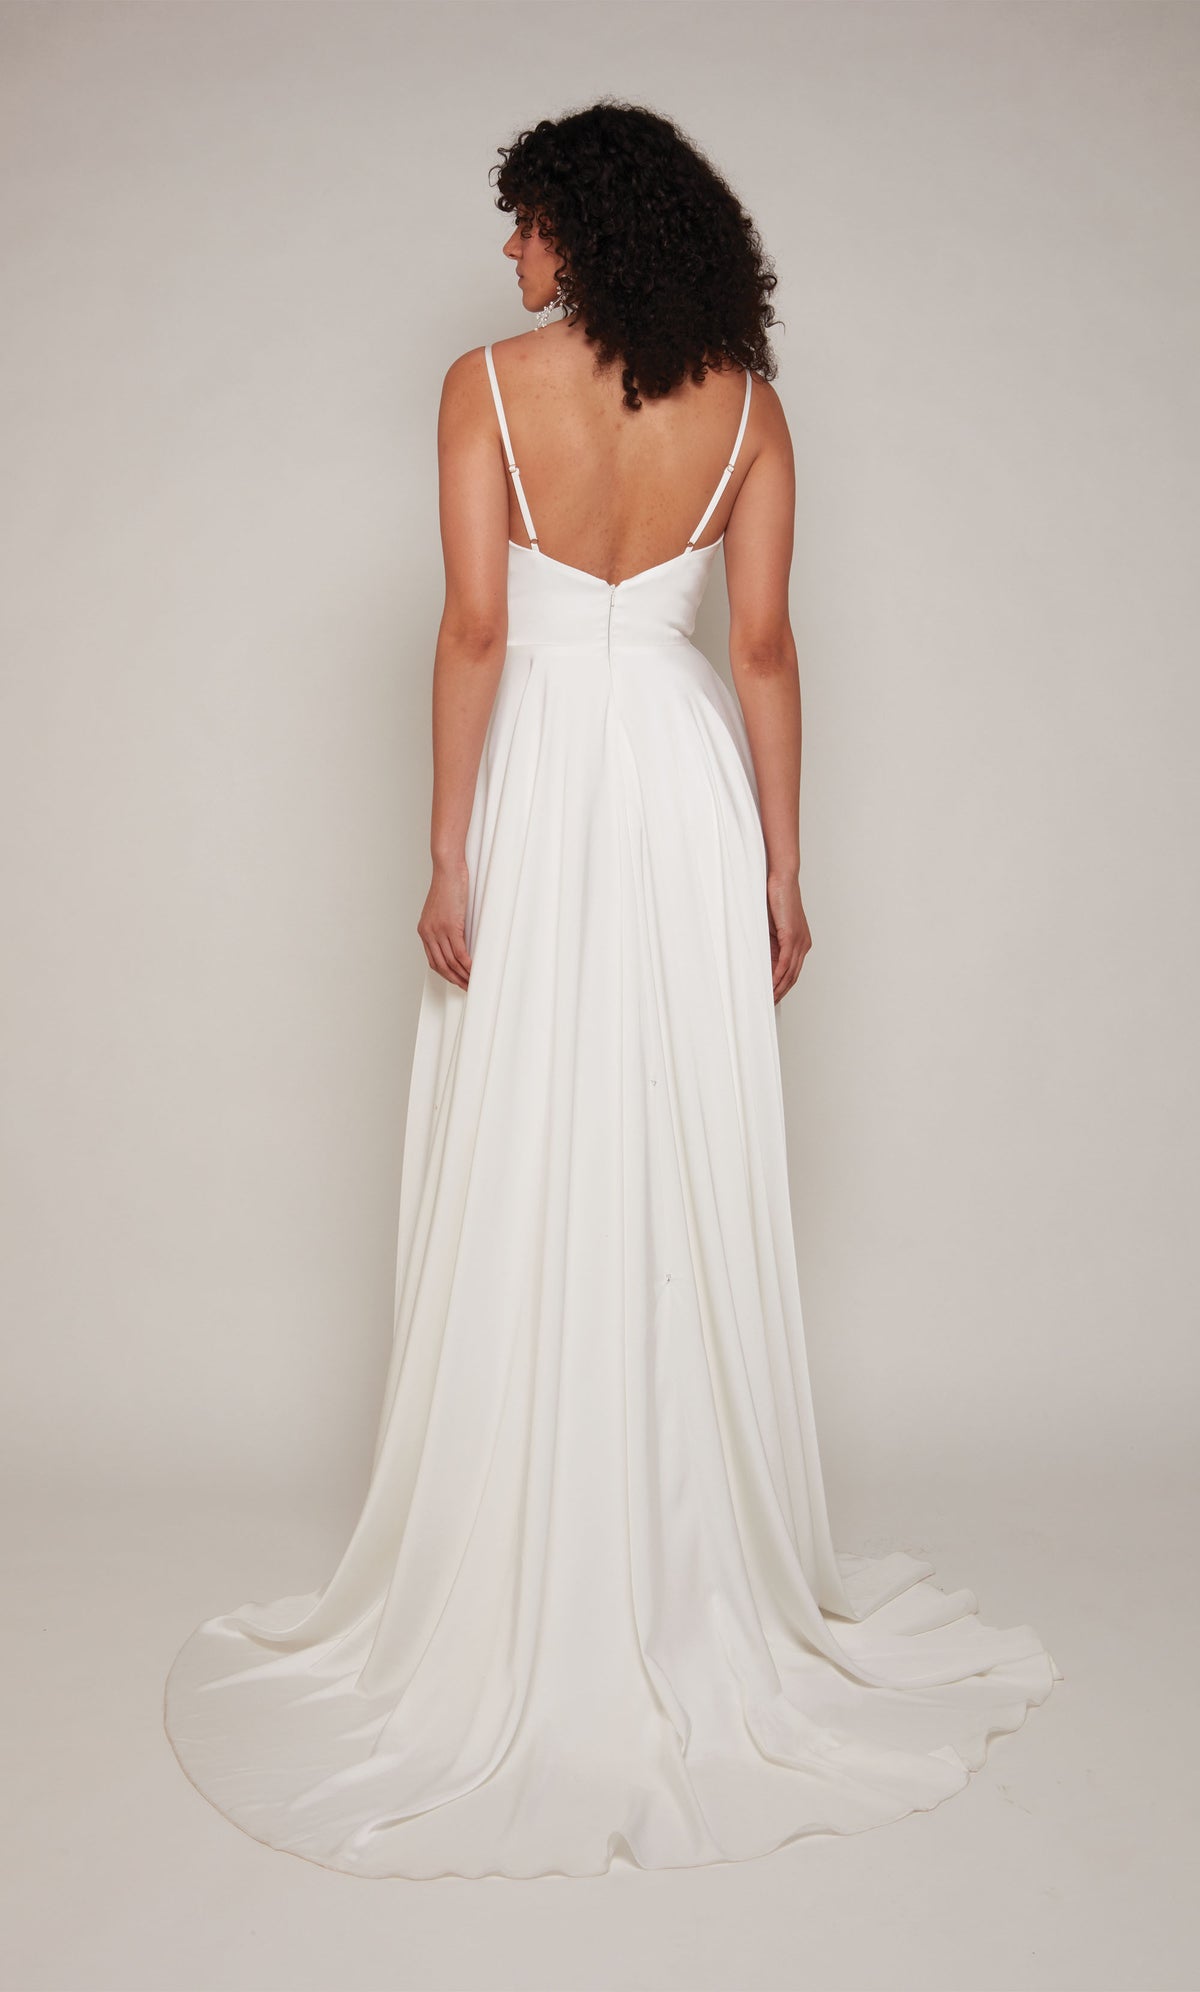 A simple wedding dress in white satin with an A-line skirt, an open back, adjustable spaghetti straps, and a train.